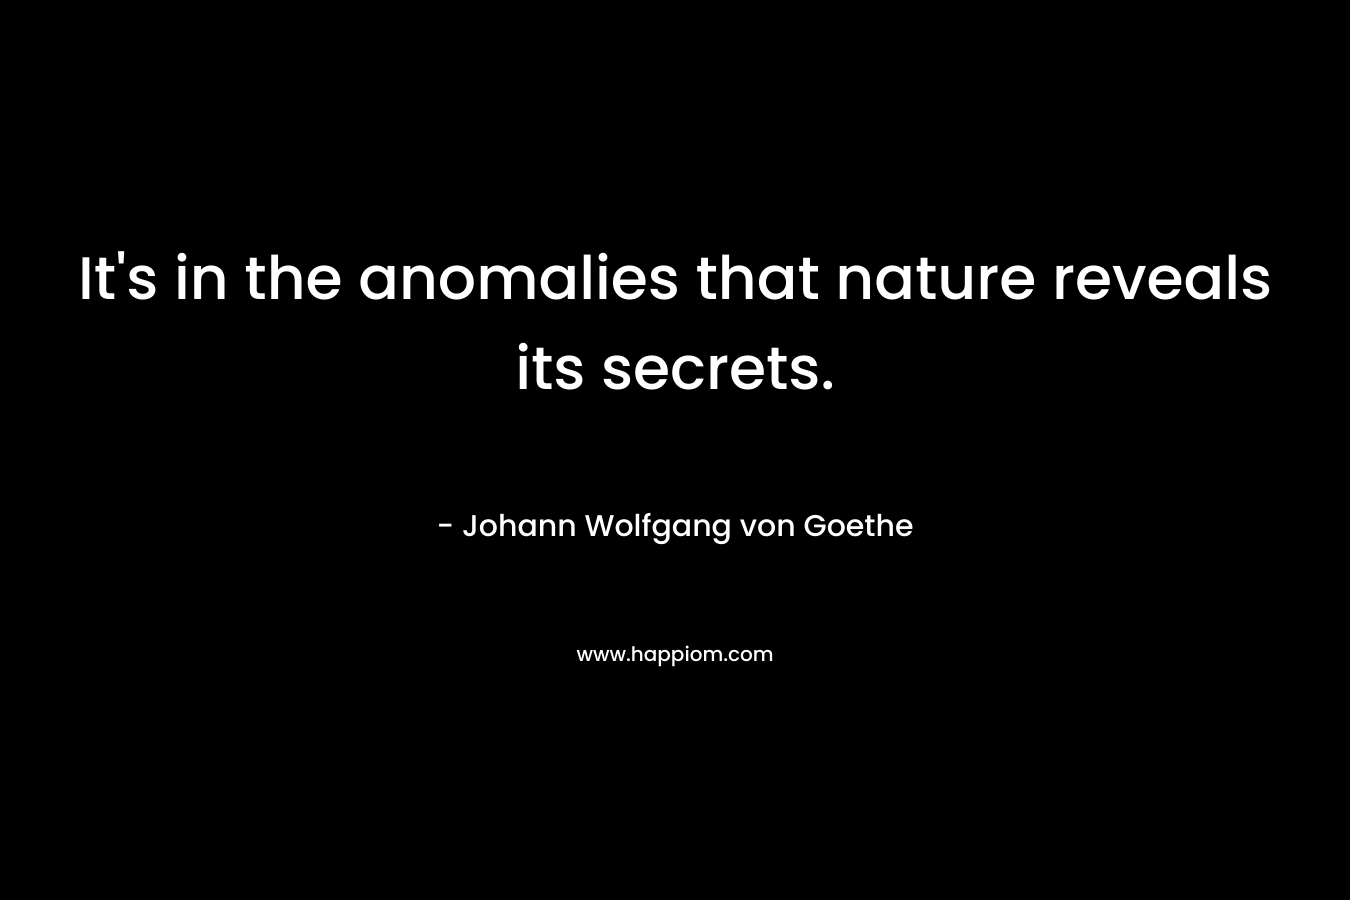 It’s in the anomalies that nature reveals its secrets. – Johann Wolfgang von Goethe